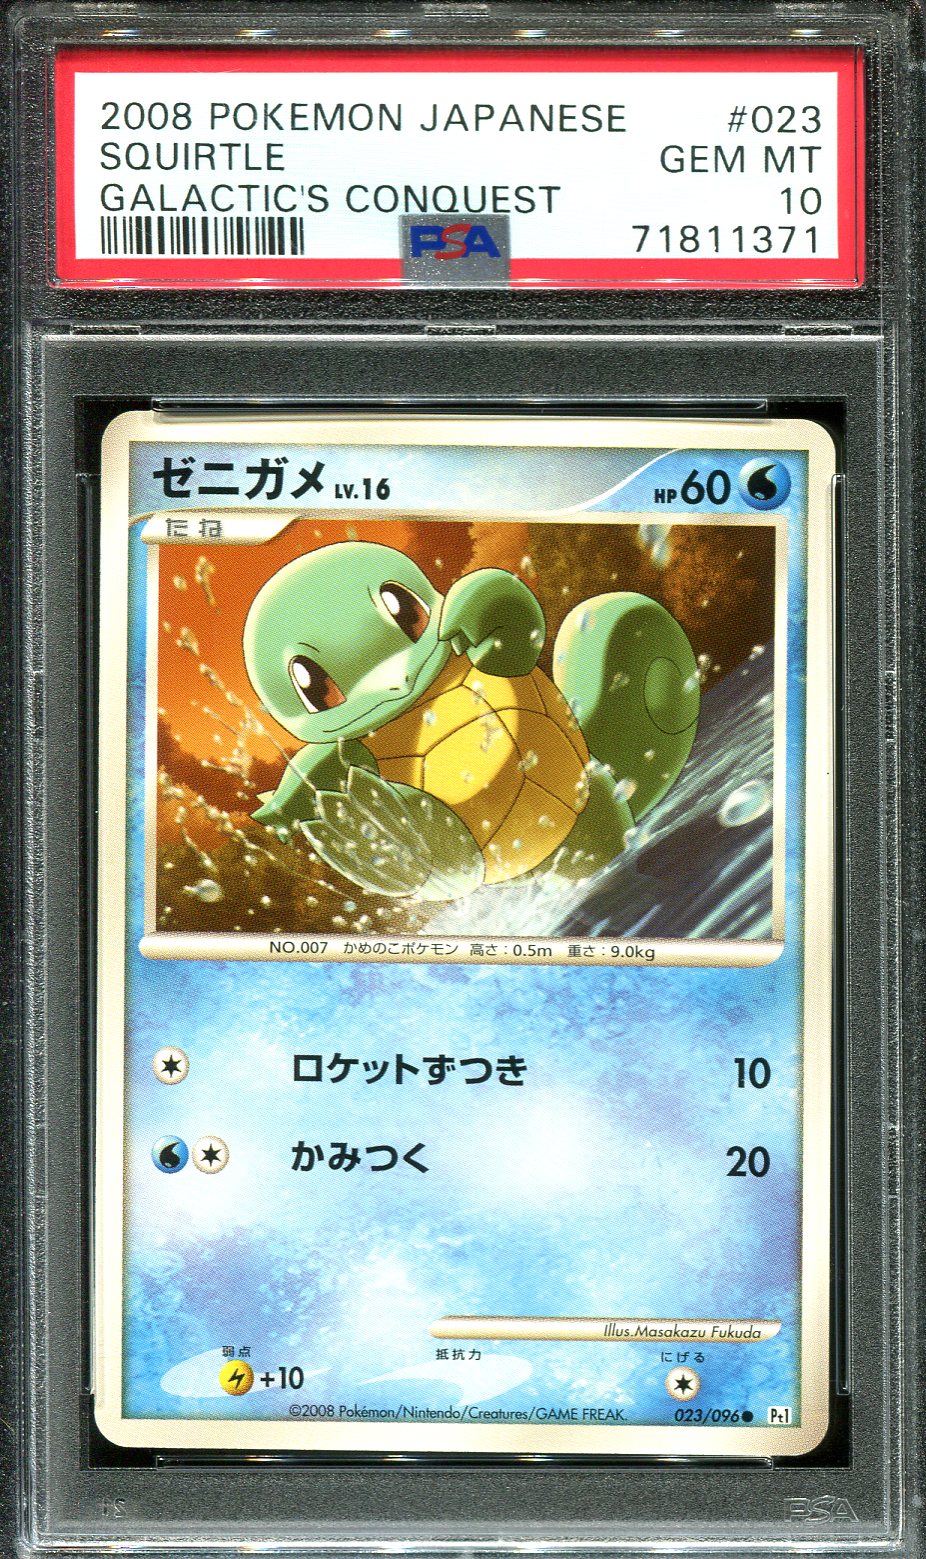 SQUIRTLE 023/096 PSA 10 POKEMON GALACTIC'S CONQUEST JAPANESE